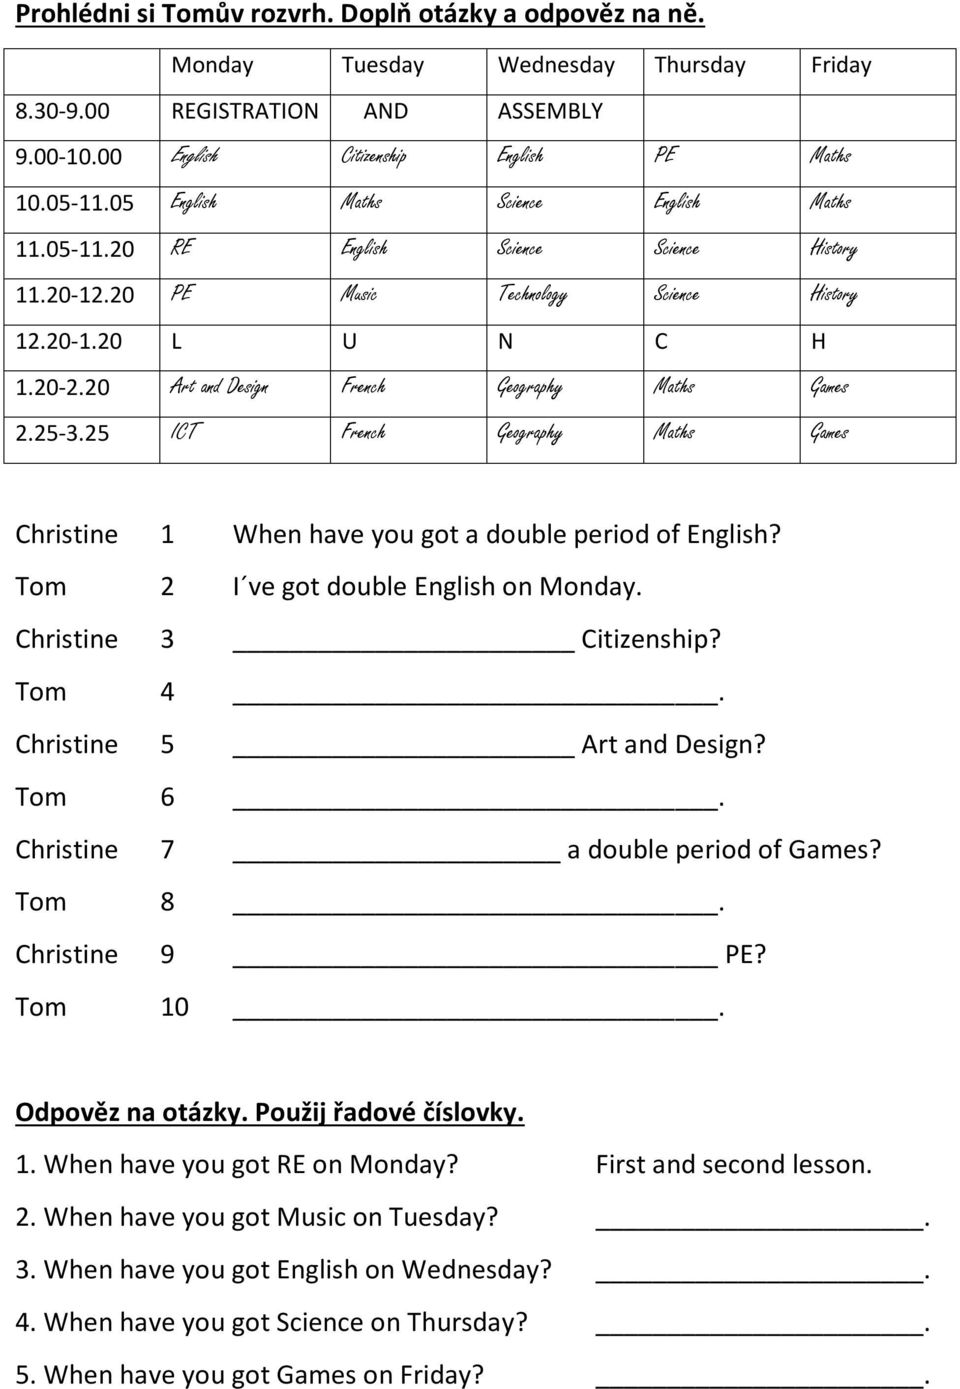 20 Art and Design French Geography Maths Games 2.25-3.25 ICT French Geography Maths Games Christine 1 When have you got a double period of English? Tom 2 I ve got double English on Monday.